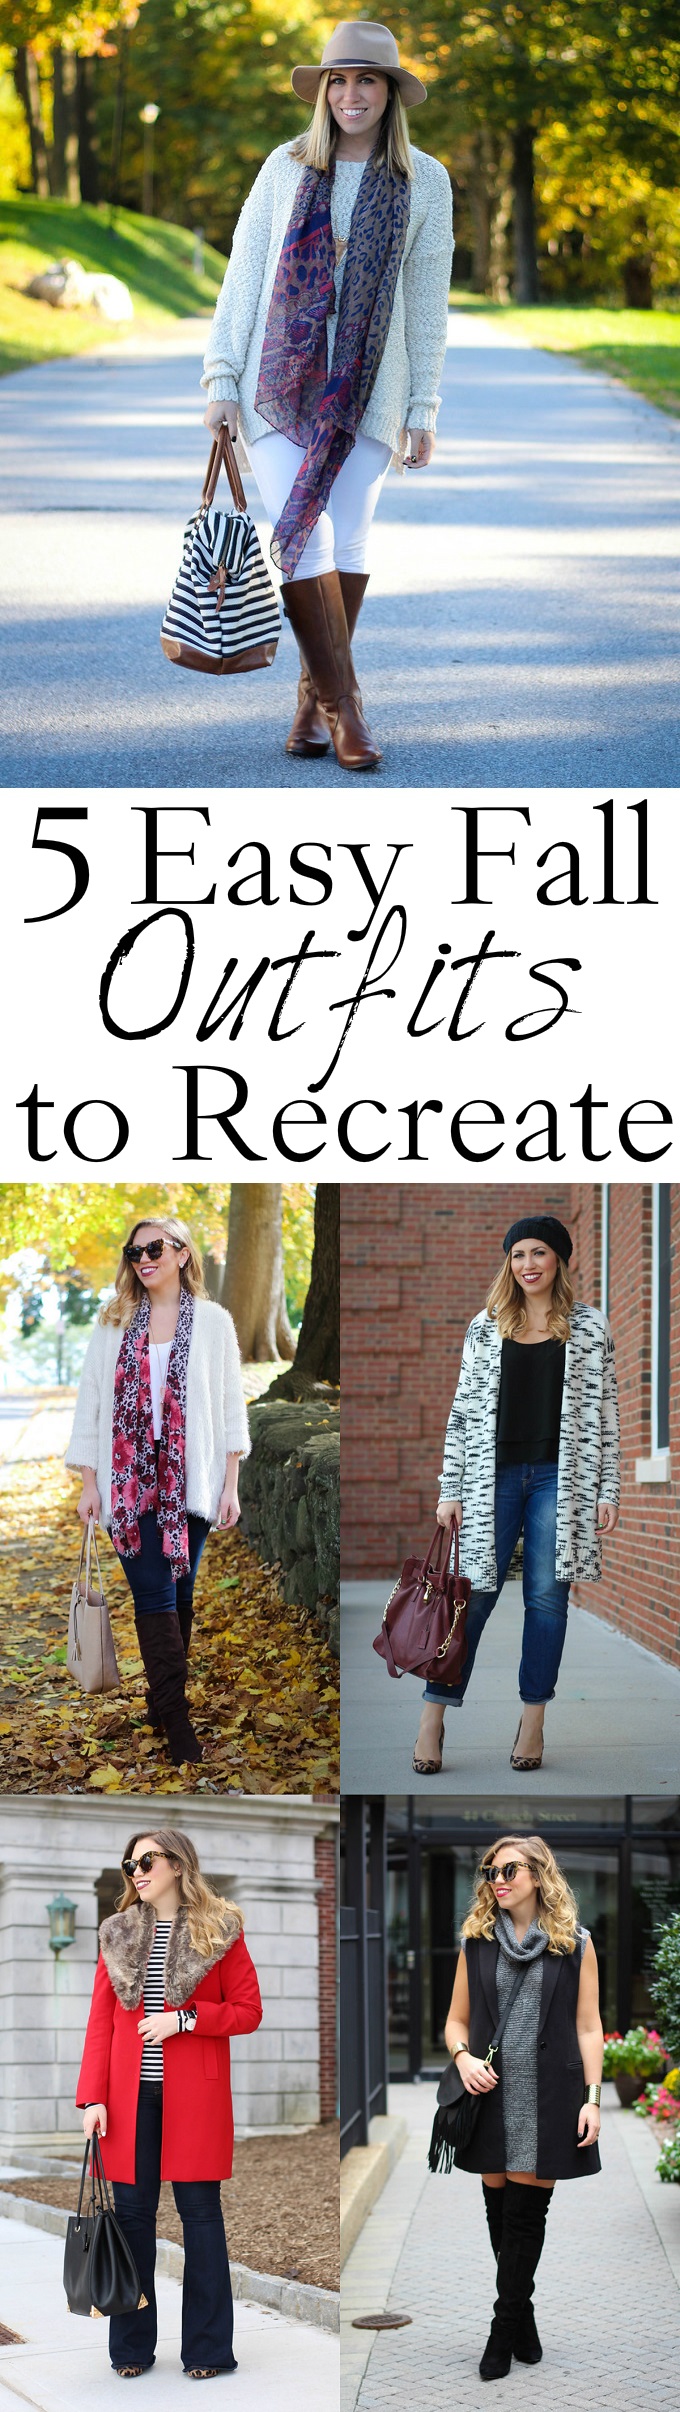 5 Easy Fall Outfits to Recreate